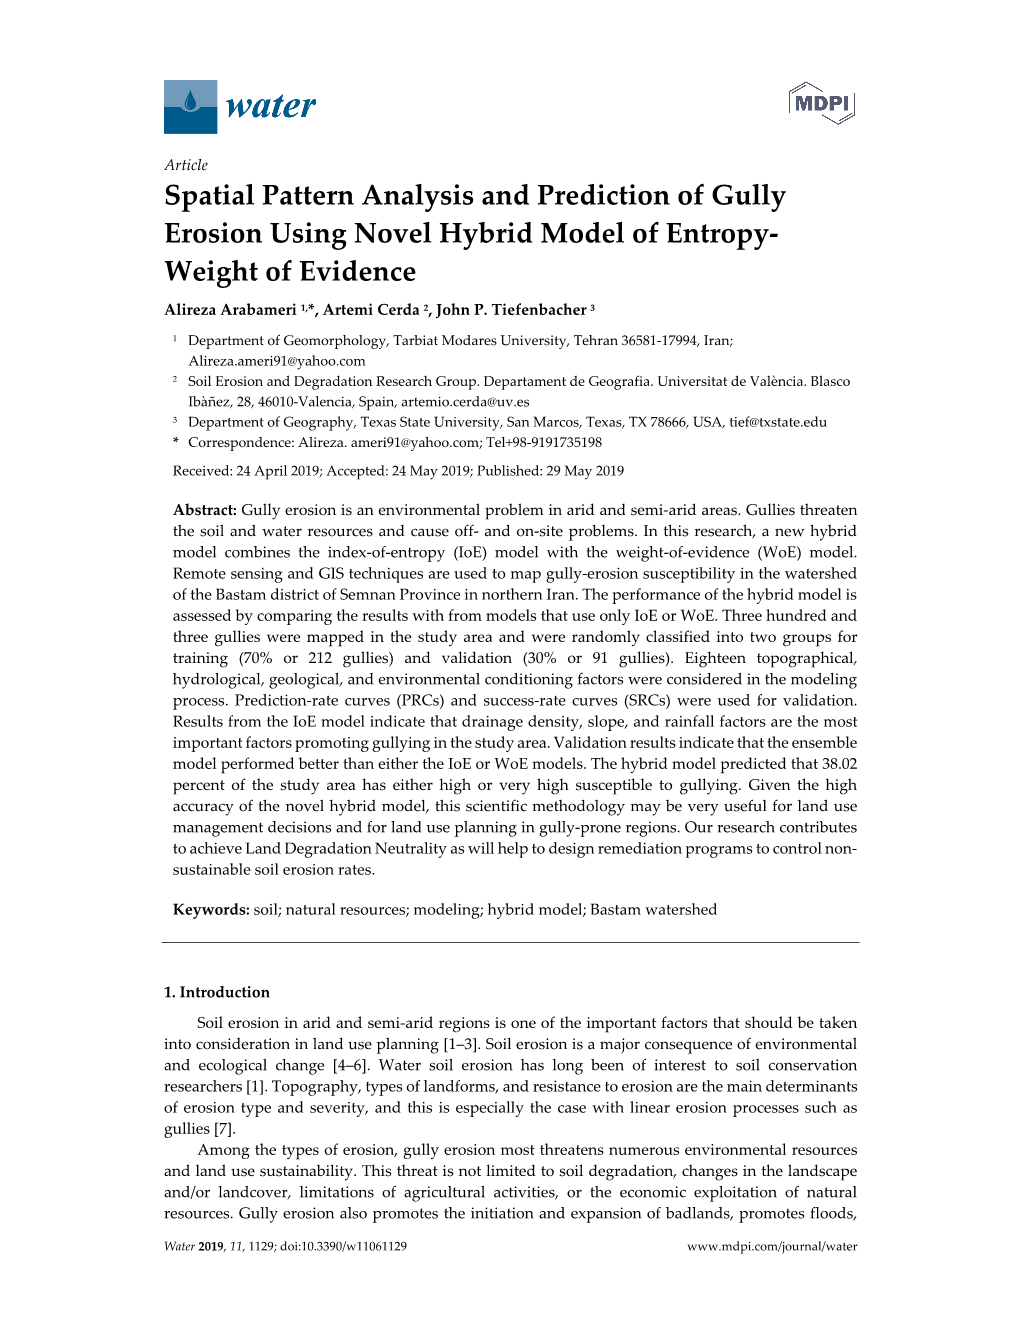 Spatial Pattern Analysis and Prediction of Gully Erosion Using Novel Hybrid Model of Entropy- Weight of Evidence